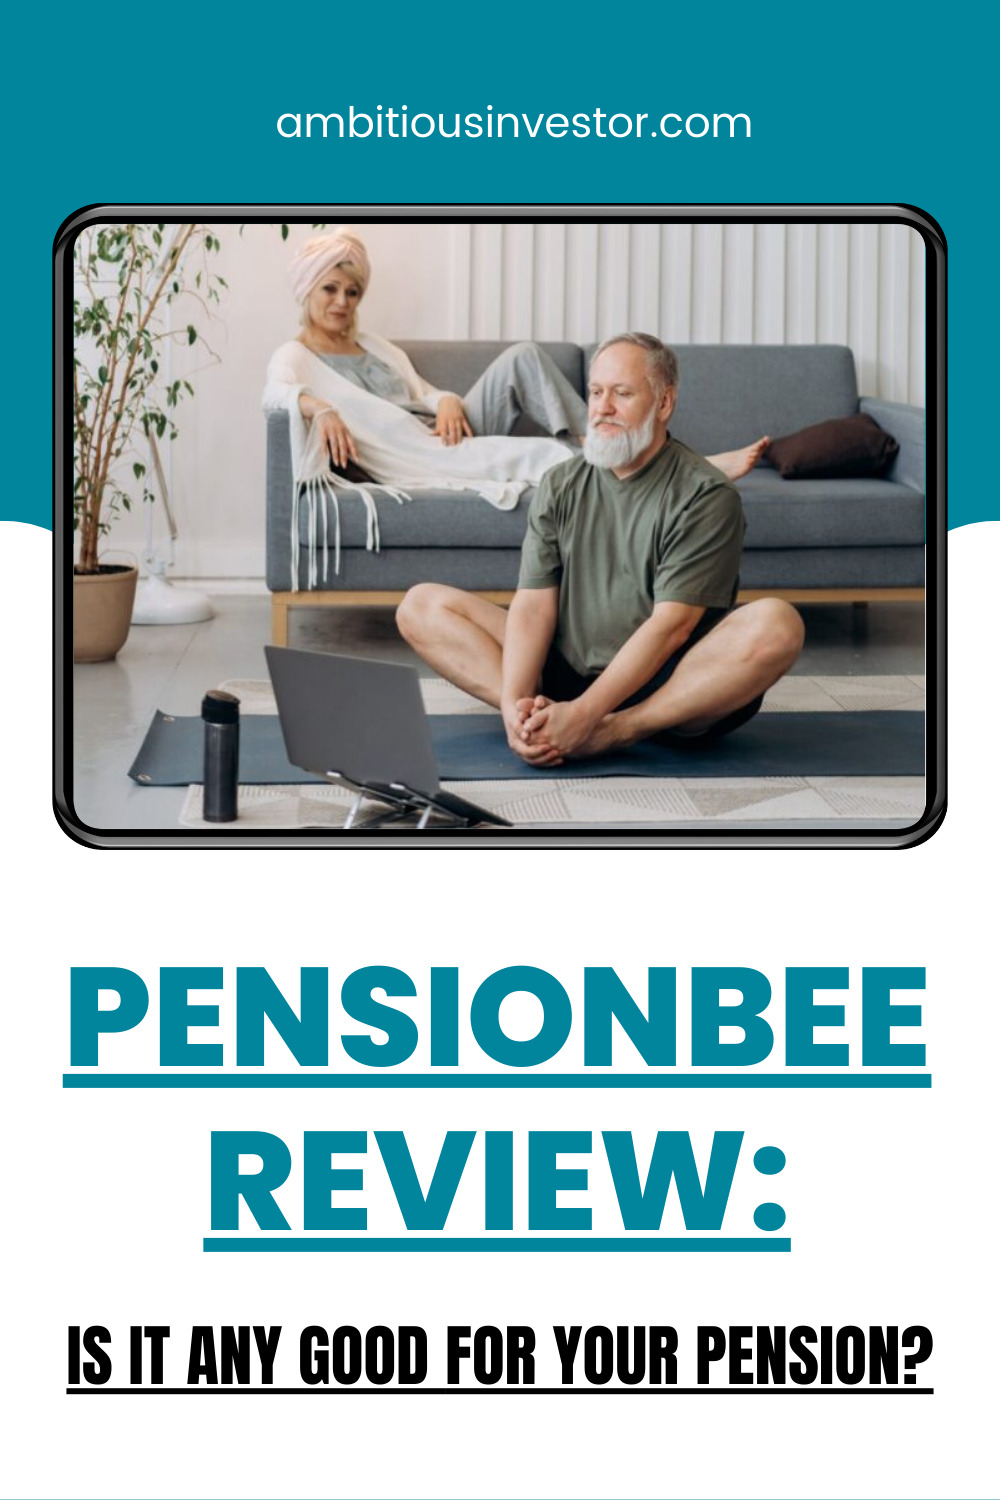 Pension Bee Review: Is it Any Good For Your Pension?